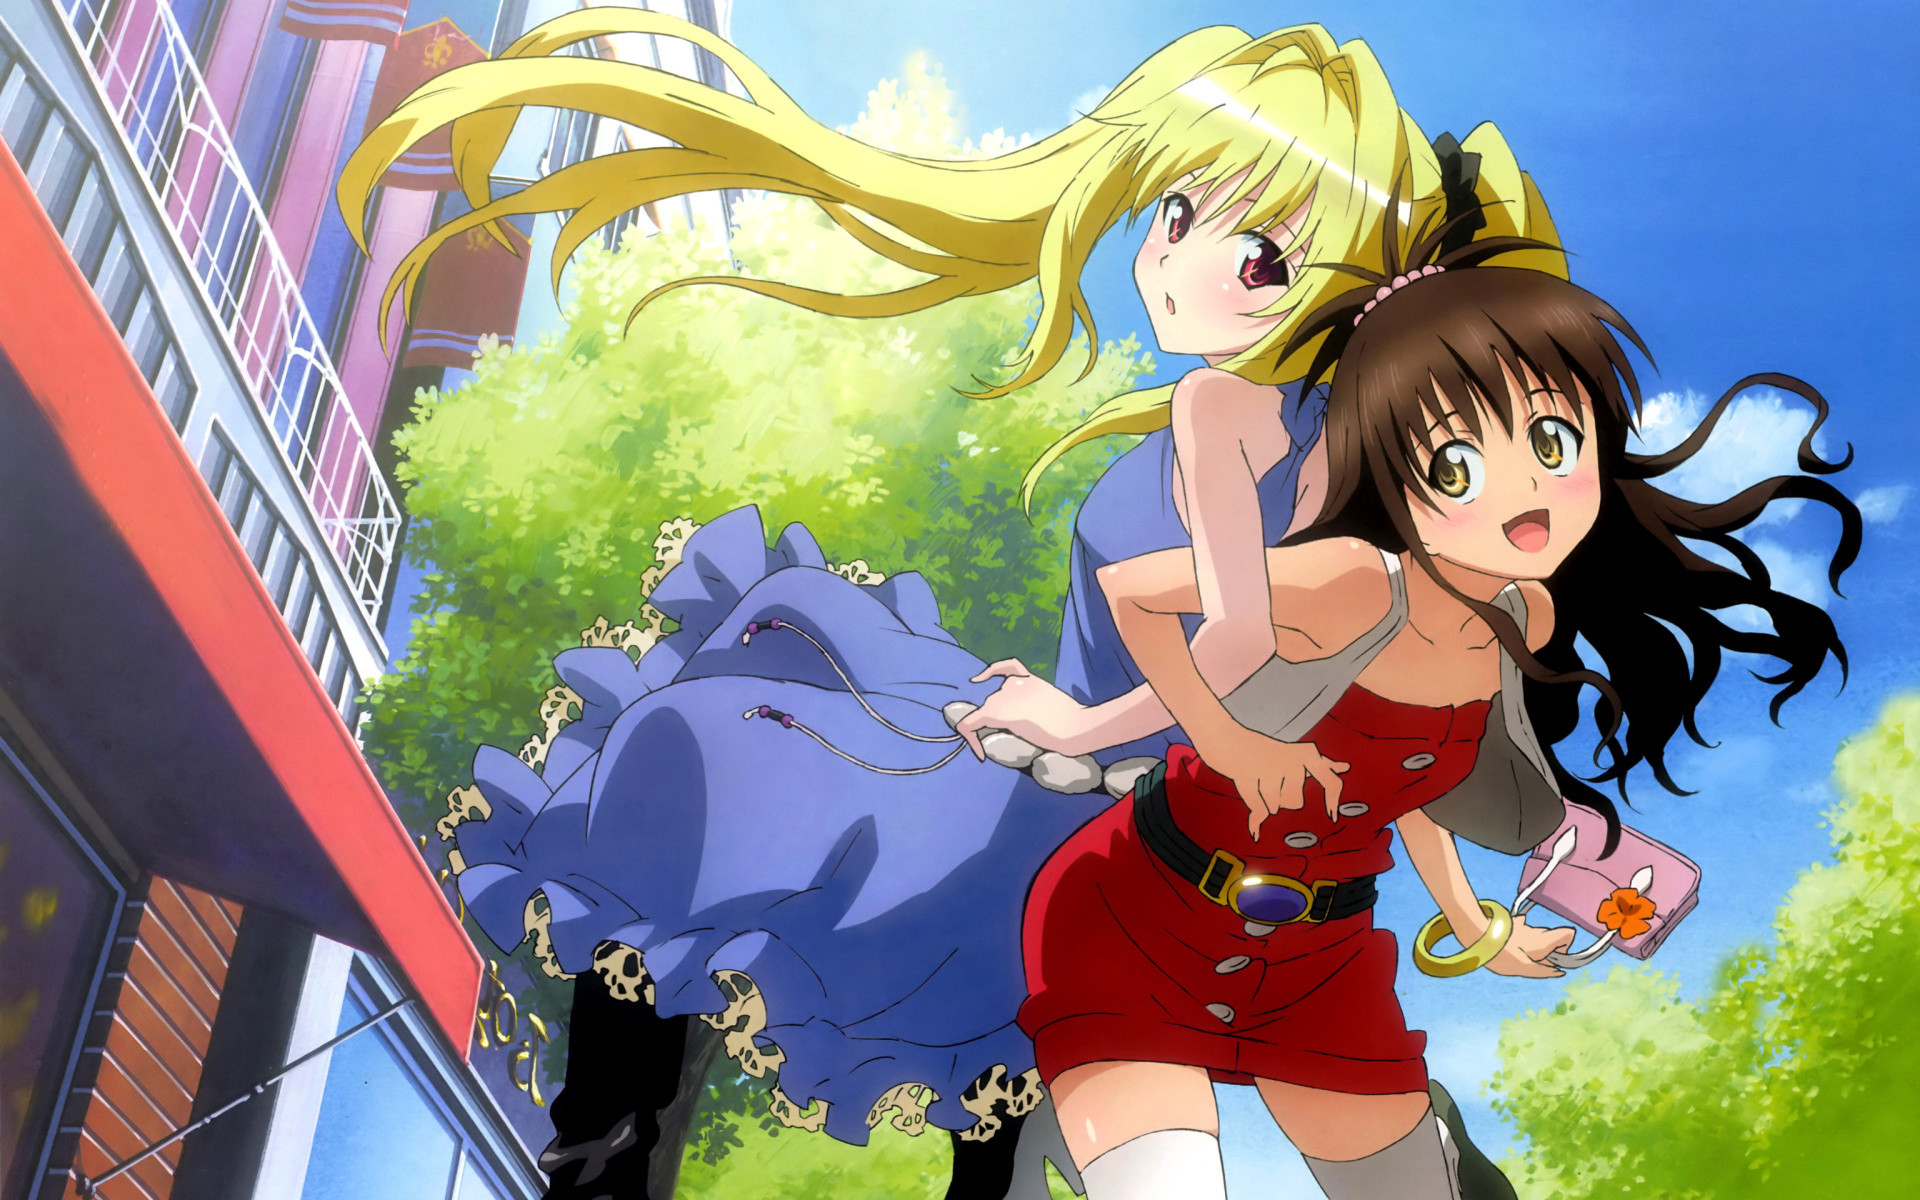 1920x1200 Anime Wallpapers for Widescreen Desktop PC 1920x1080 Full HD